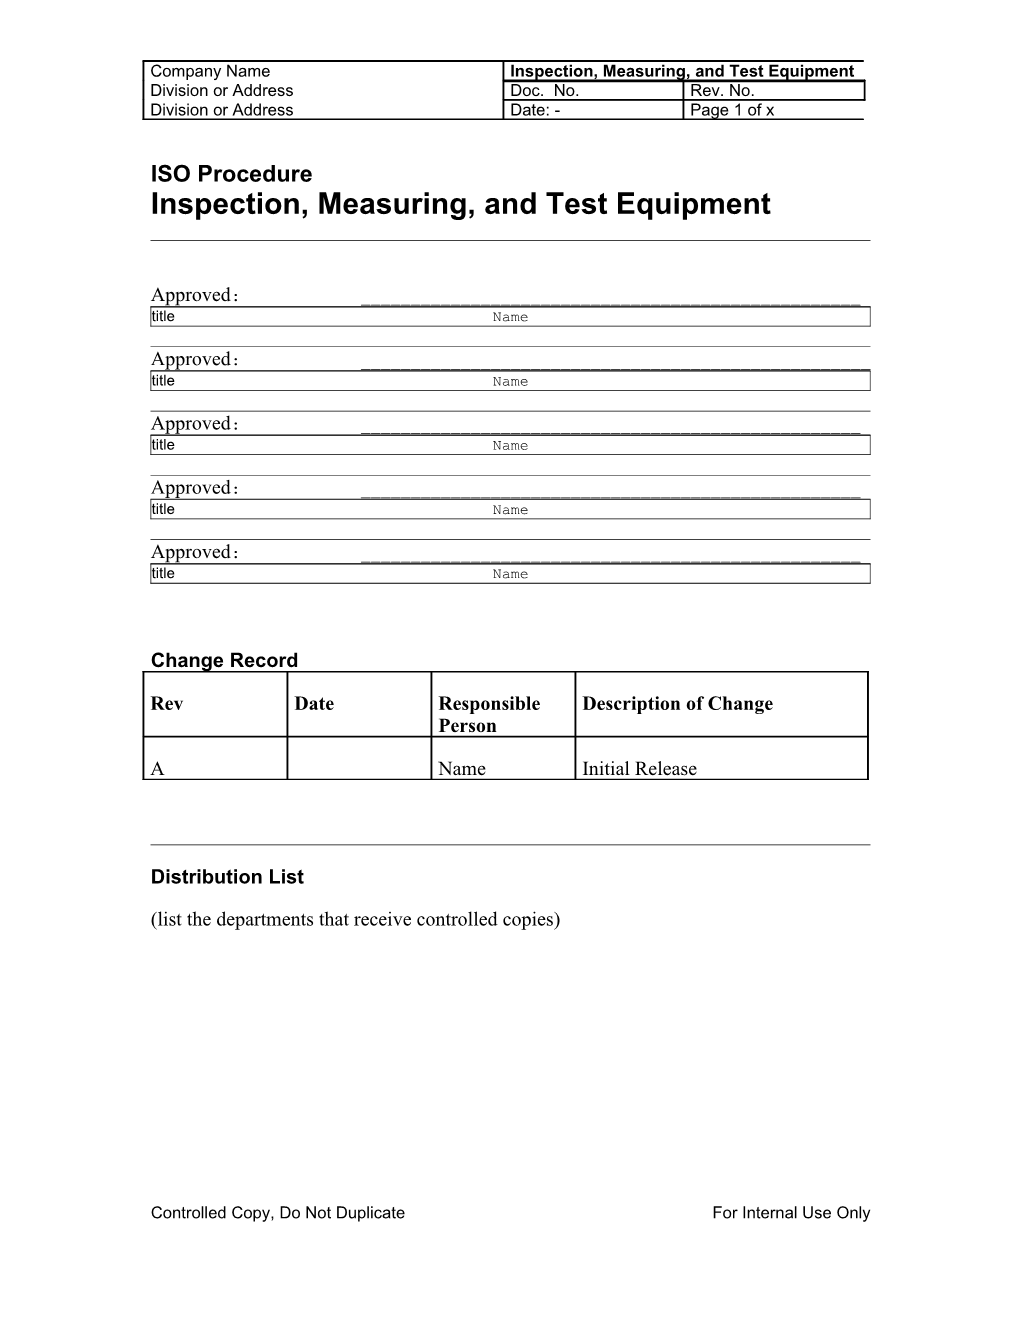 Inspection, Measuring, and Test Equipment